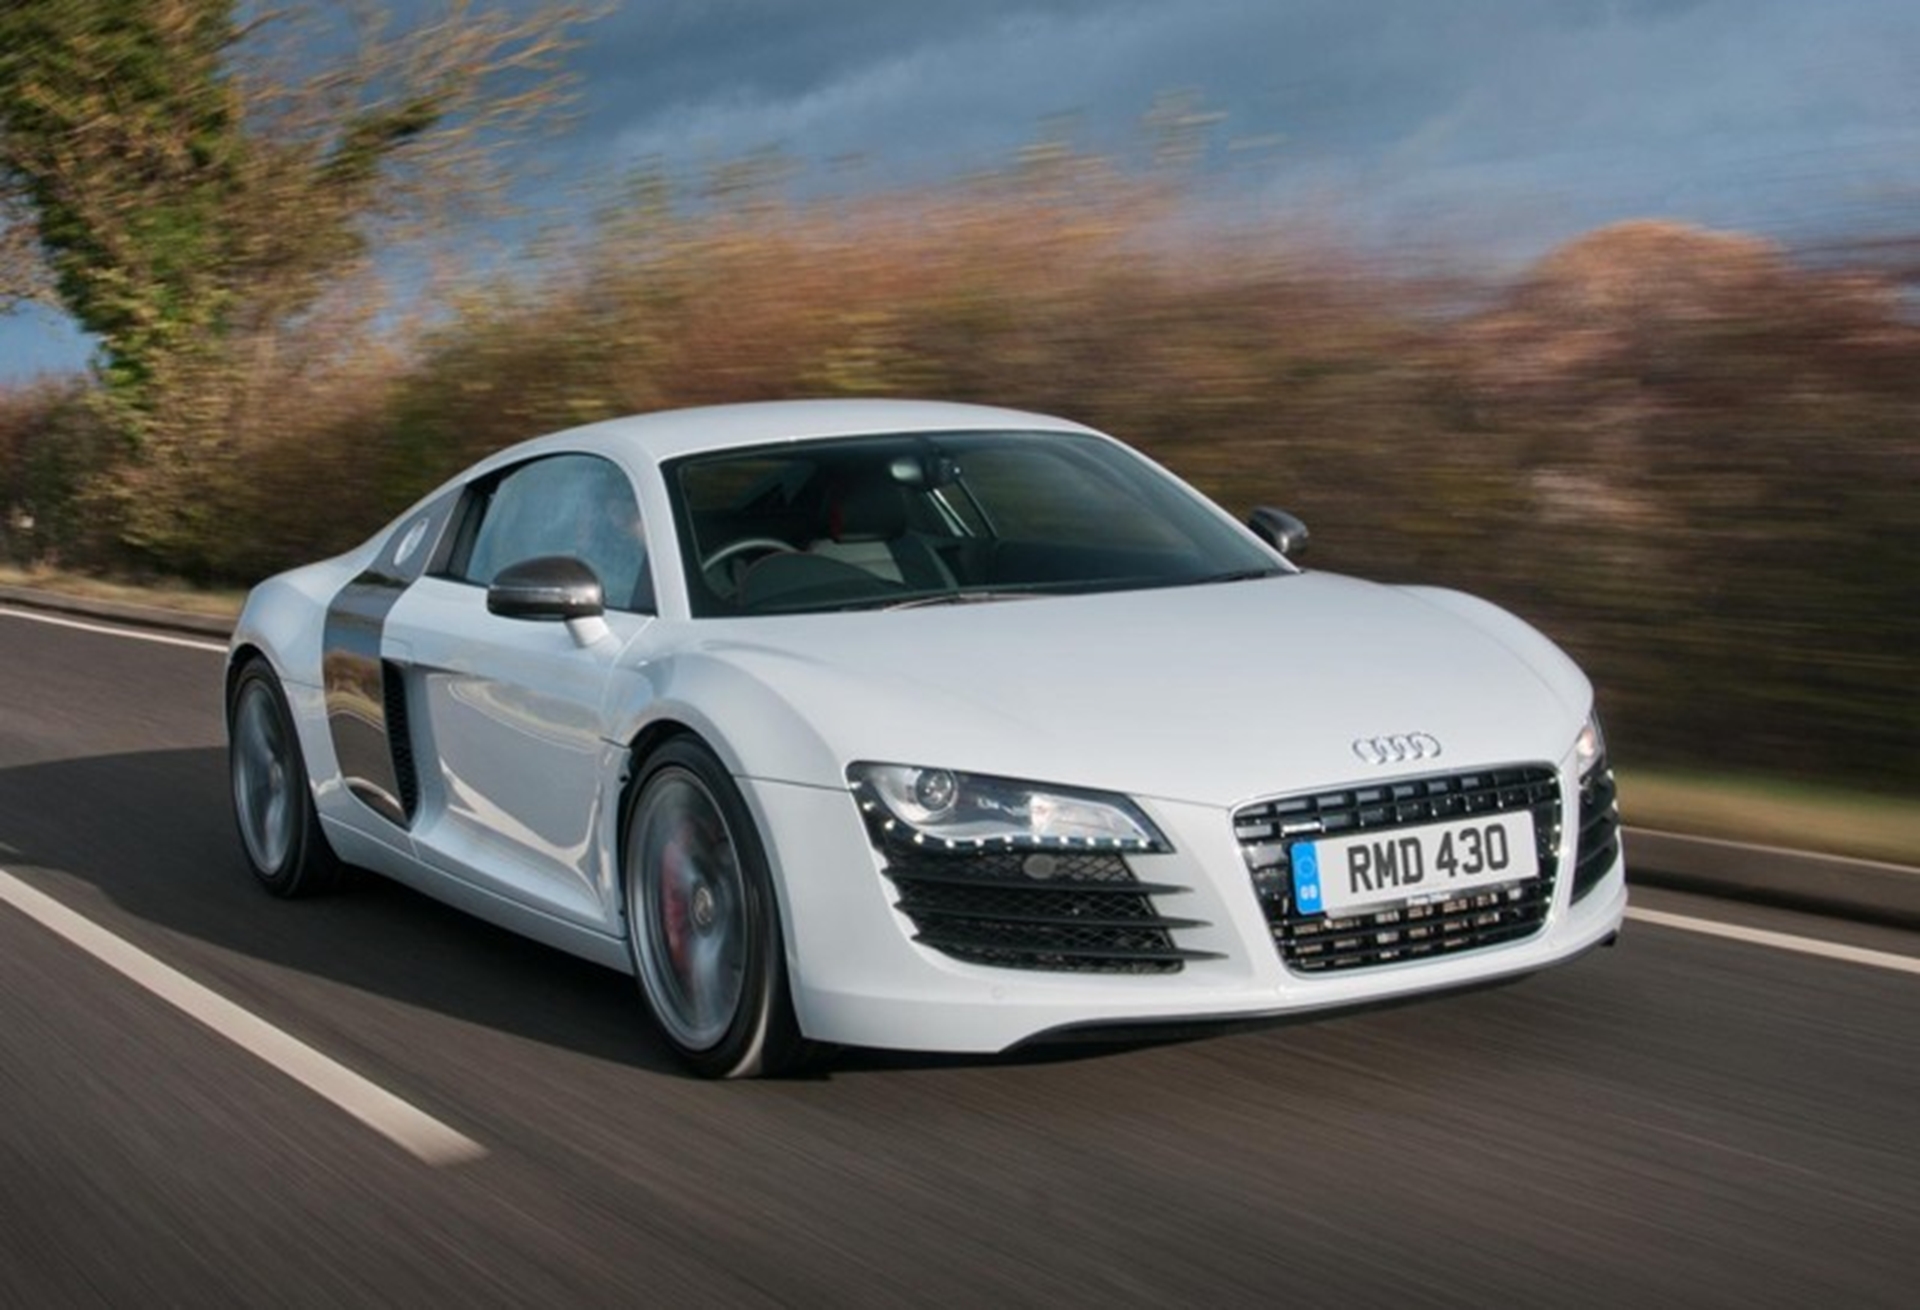 Audi Brings Back #WantAnR8 Campaign with New TV Spot and Twitter Contest Launching Today